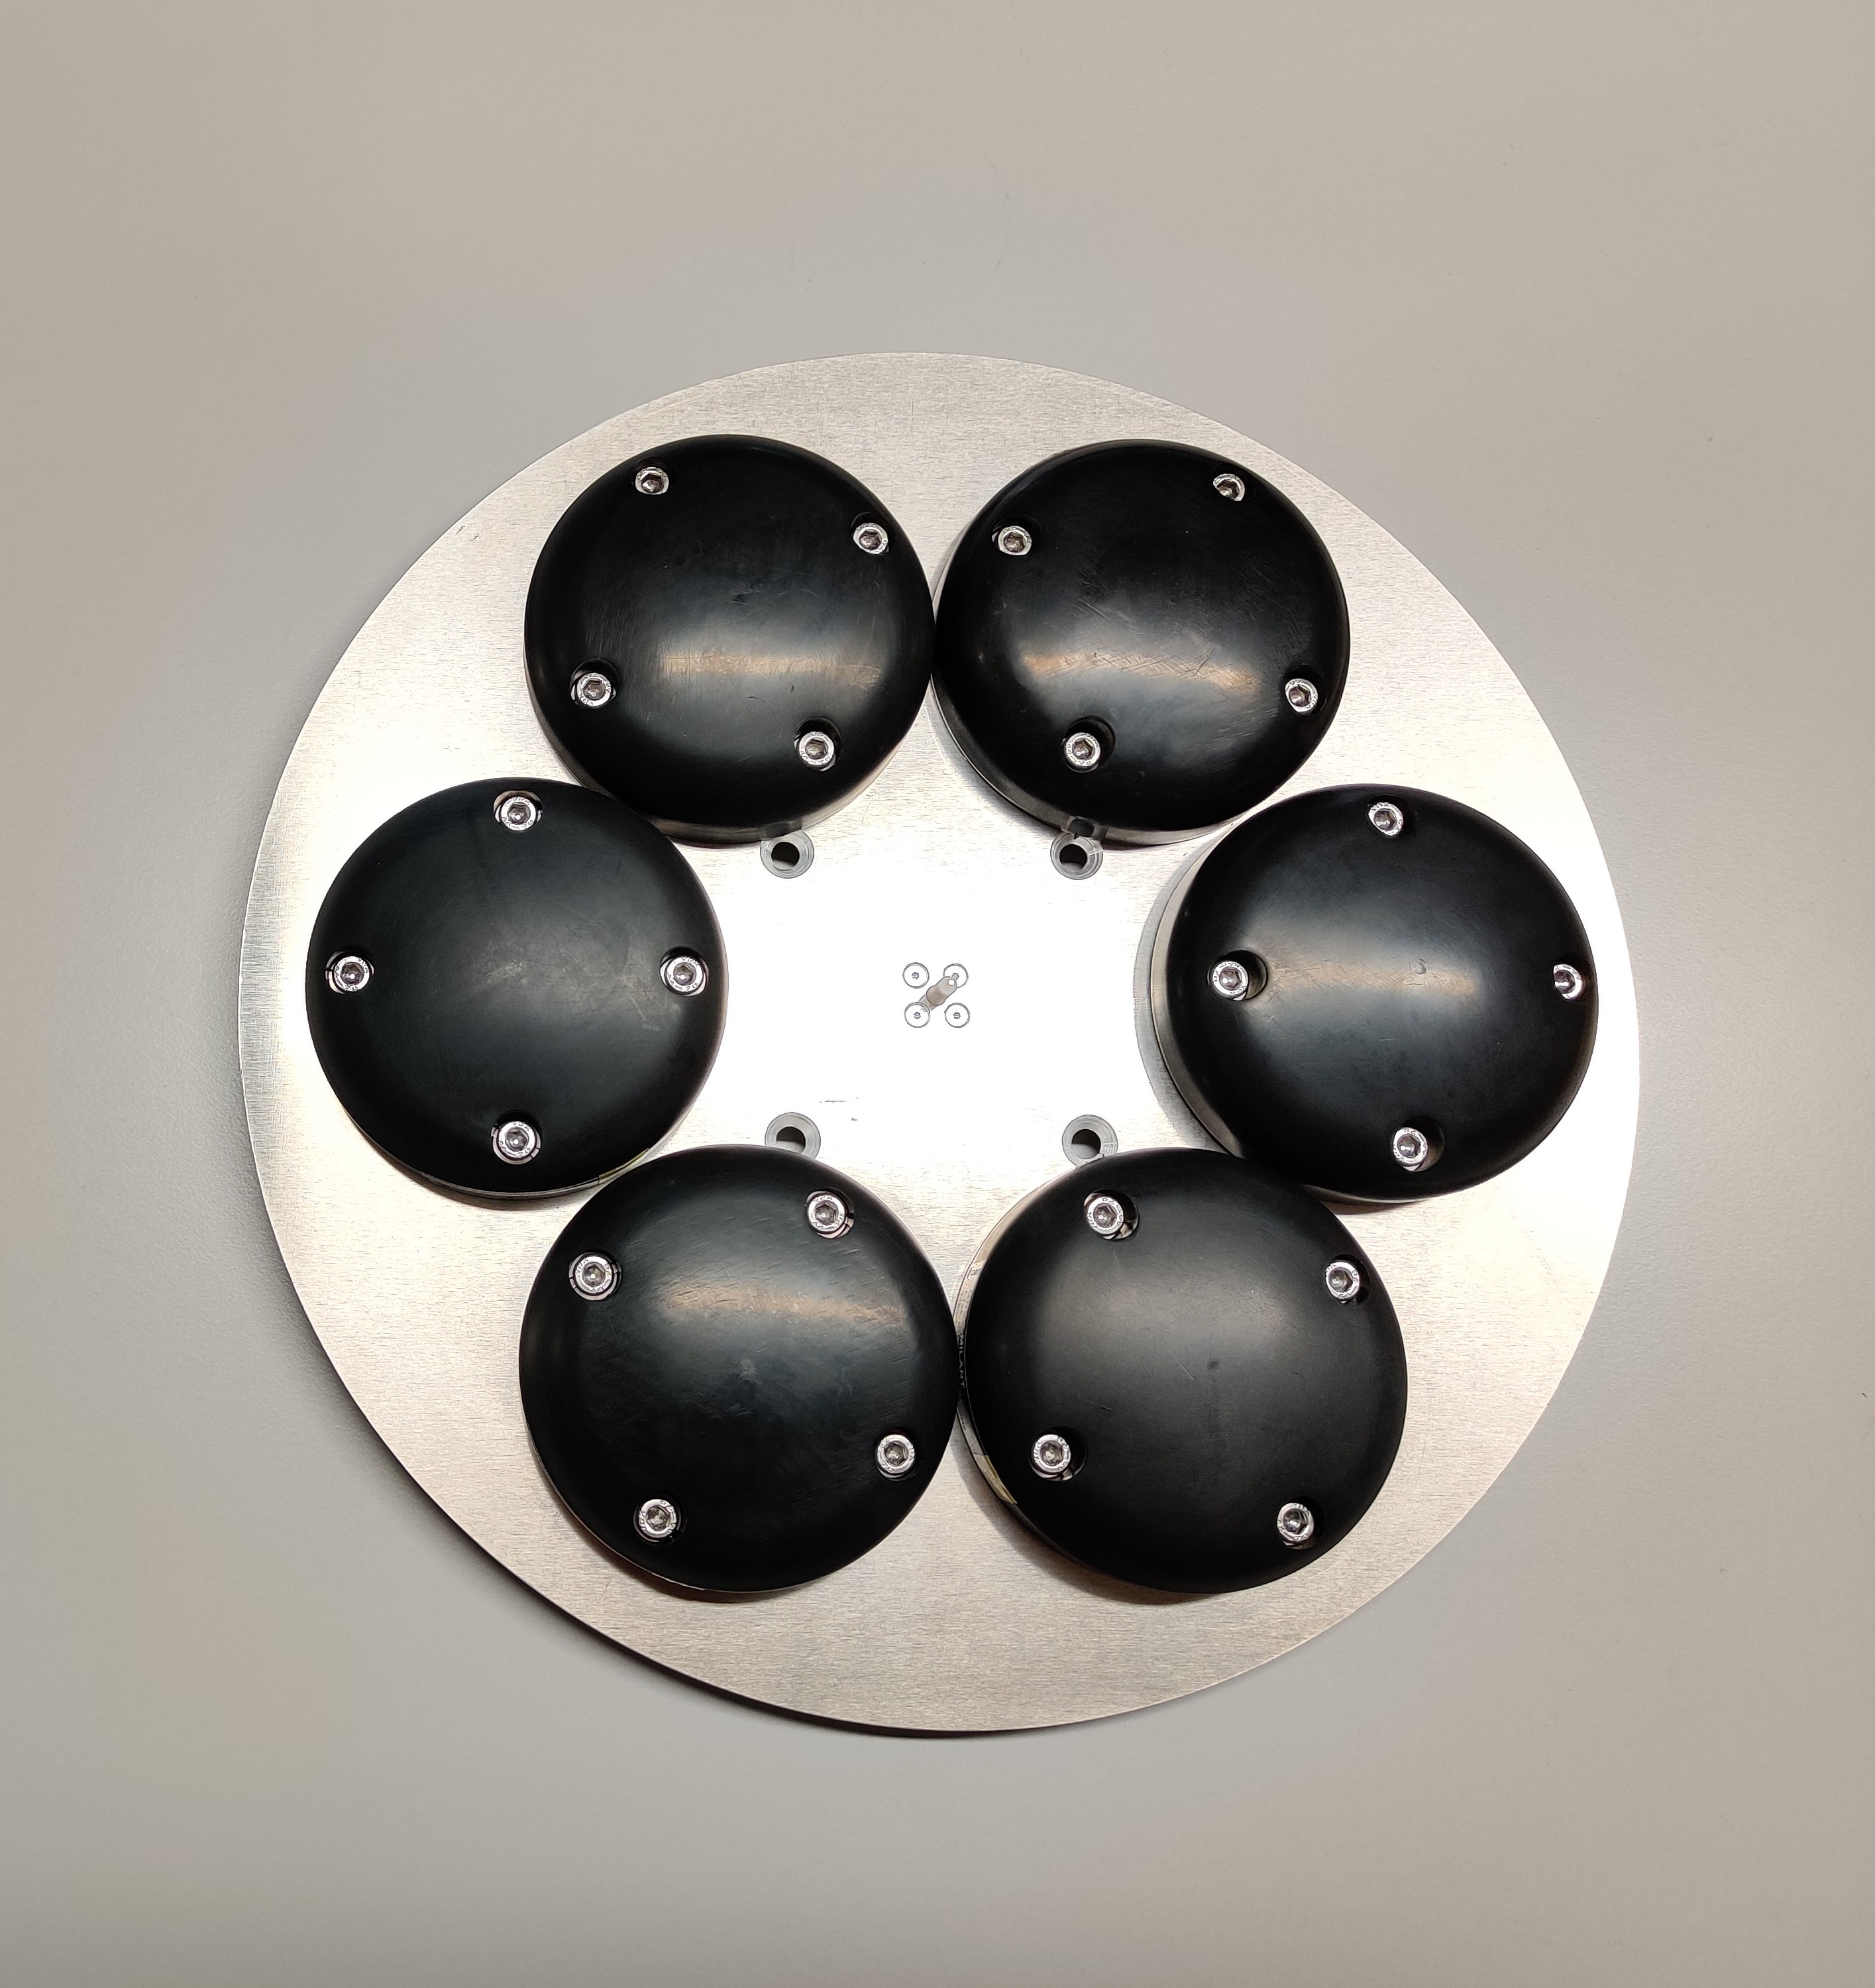 TeleOrbit's GNSSA-6E six-element antenna pictured from above showing the six black antenna eements mounted on the metal base plate